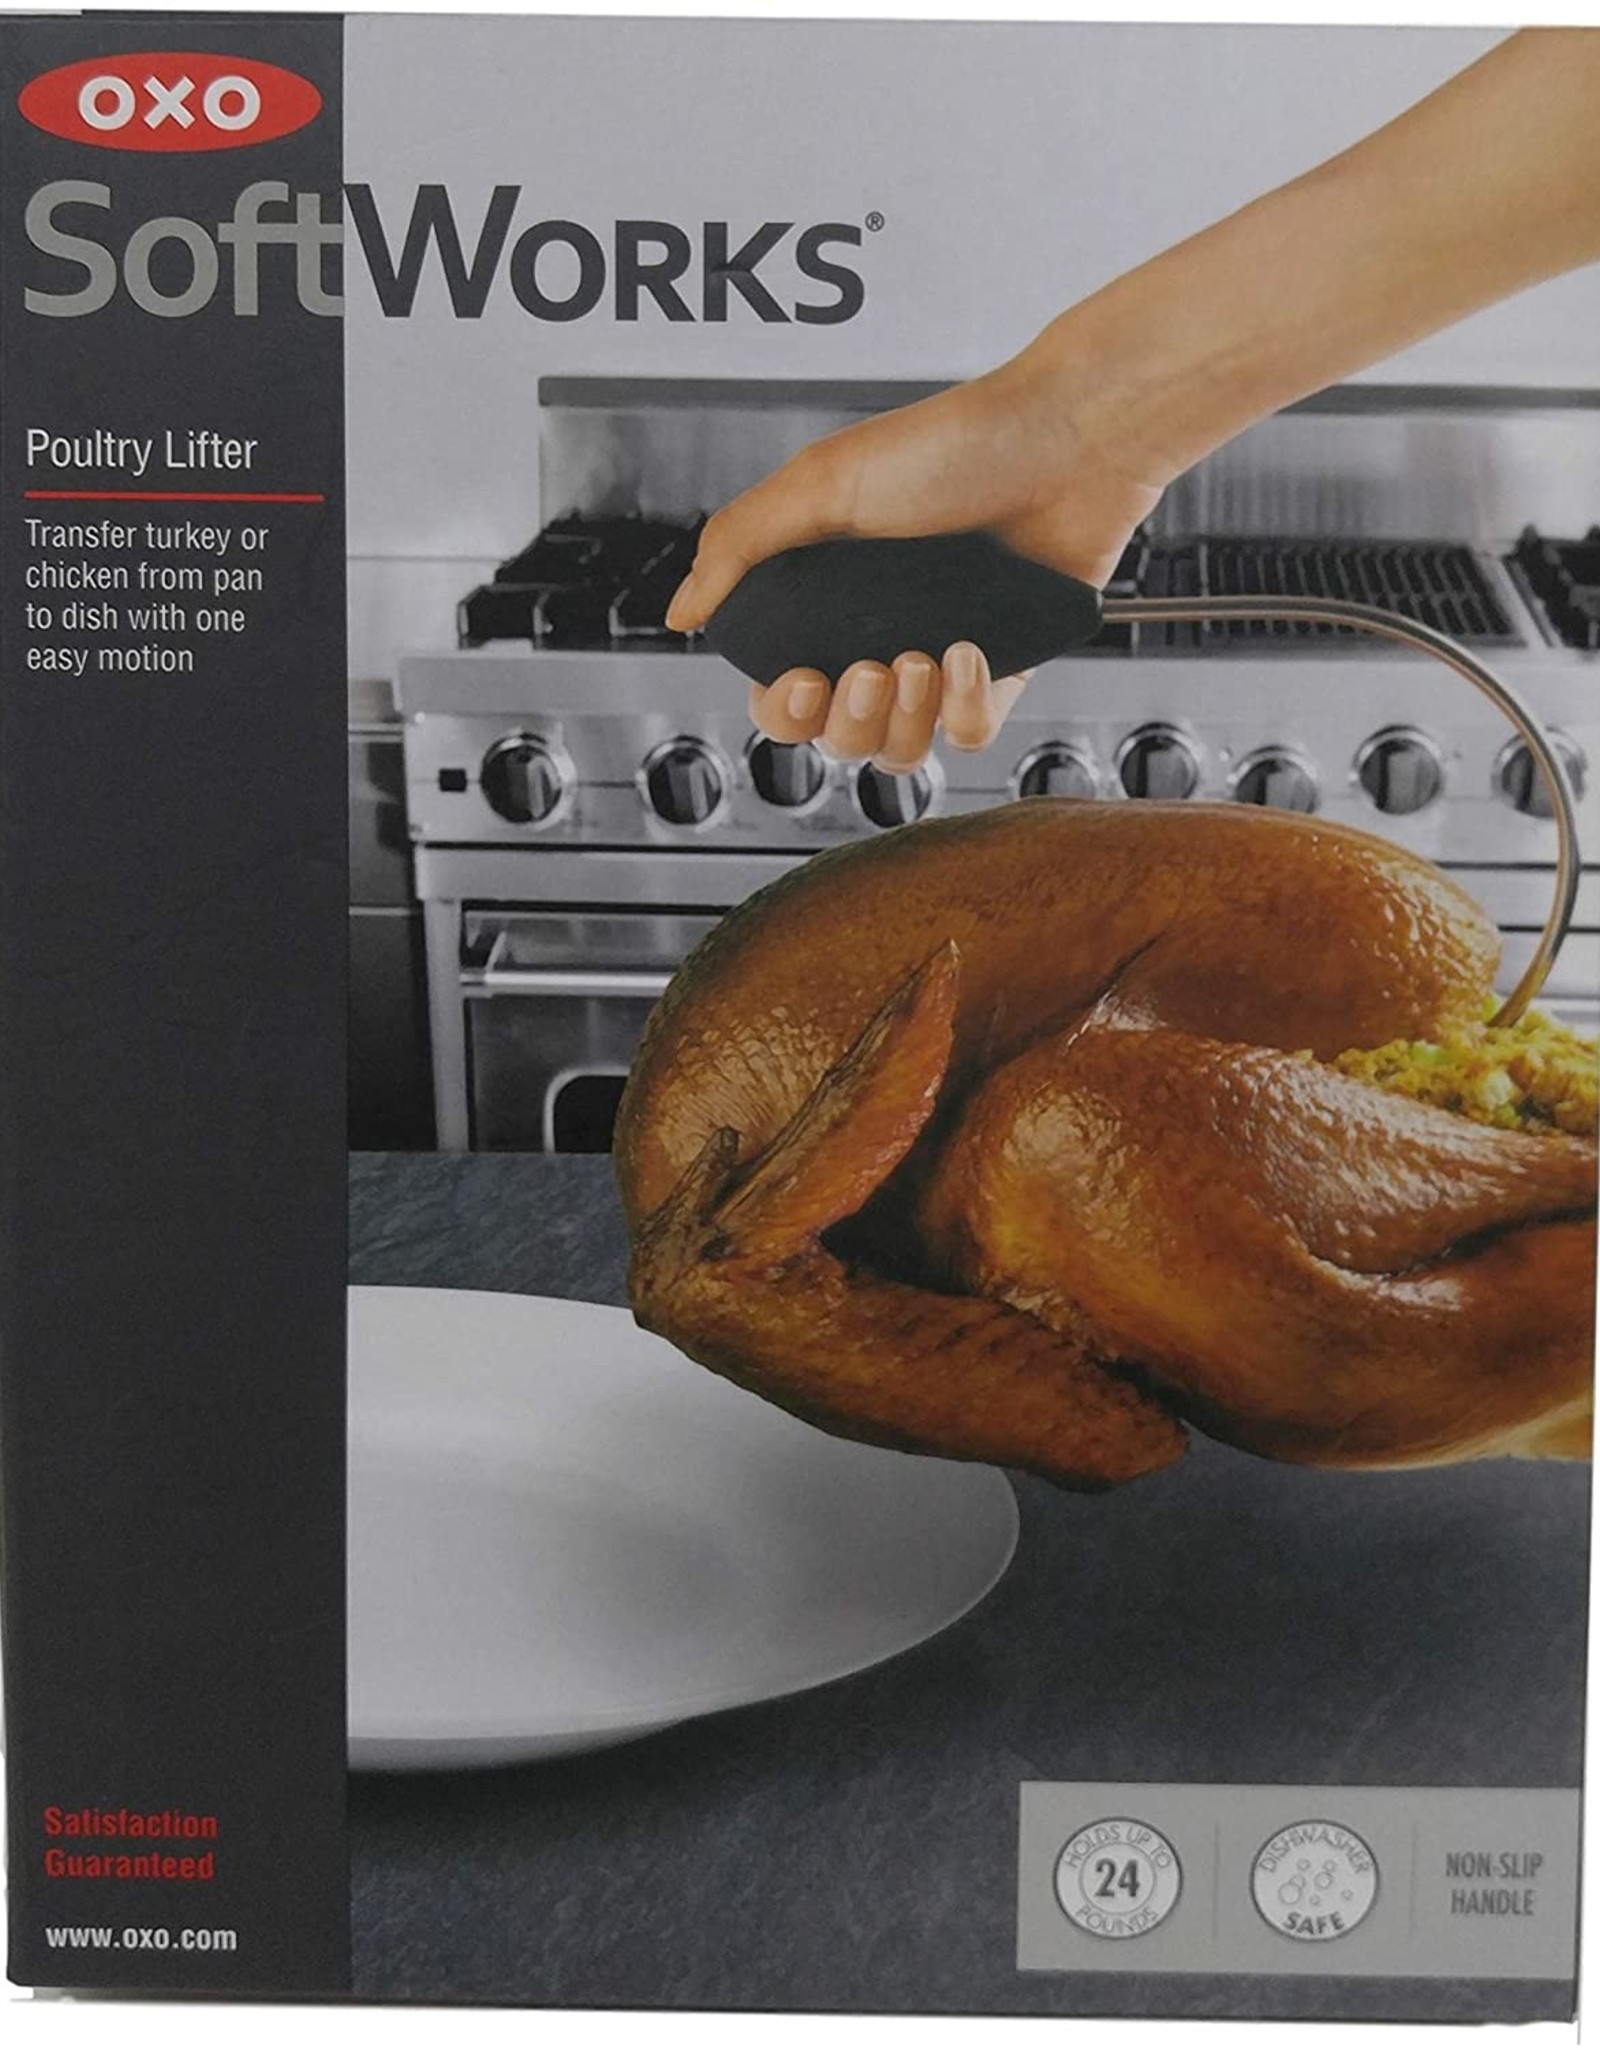 OXO SoftWorks Poultry Lifter